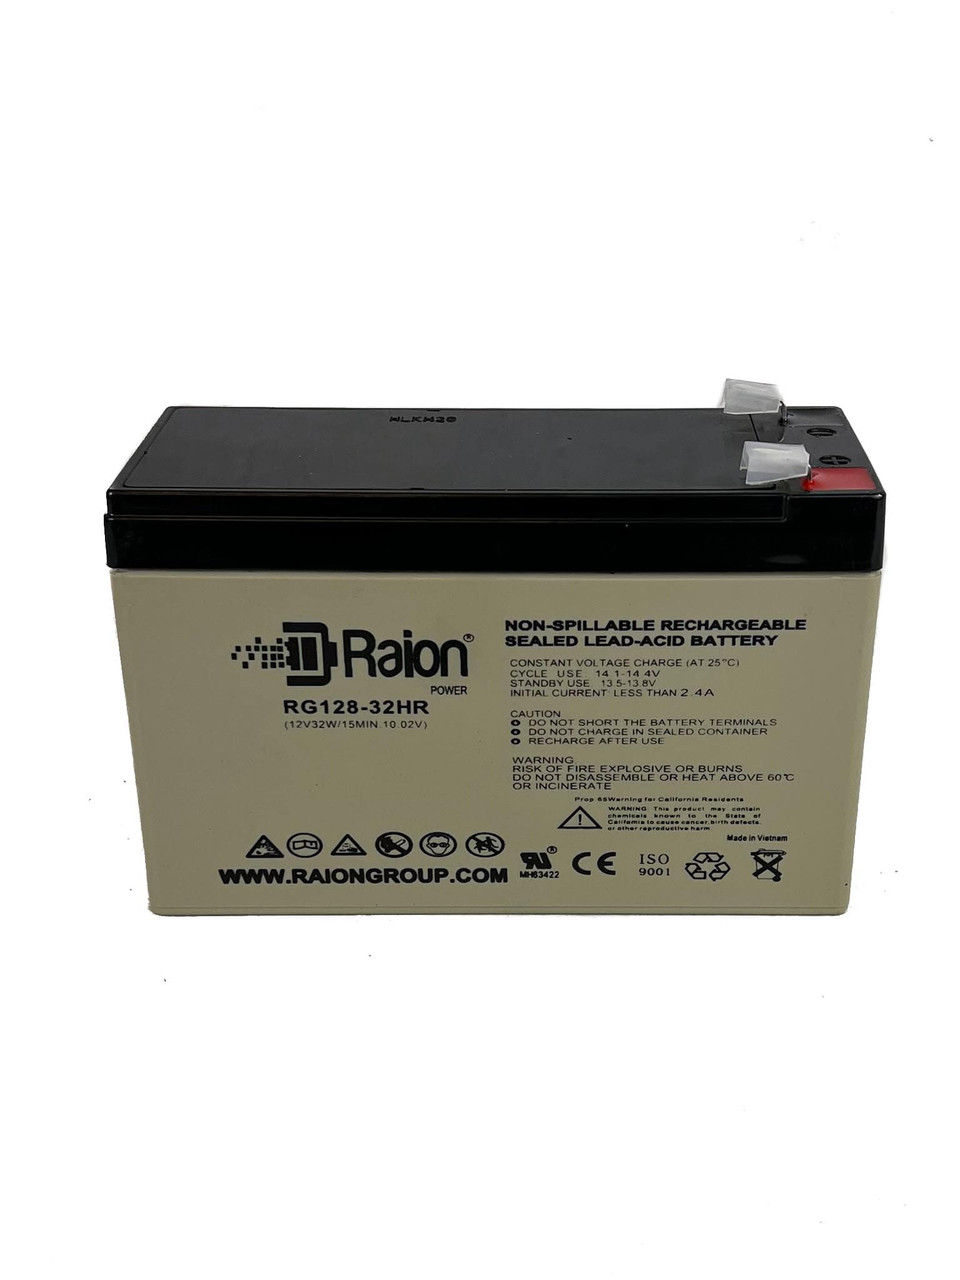 Raion Power RG128-32HR Replacement High Rate Battery Cartridge for Toshiba 1200 SER.5KVA OPT